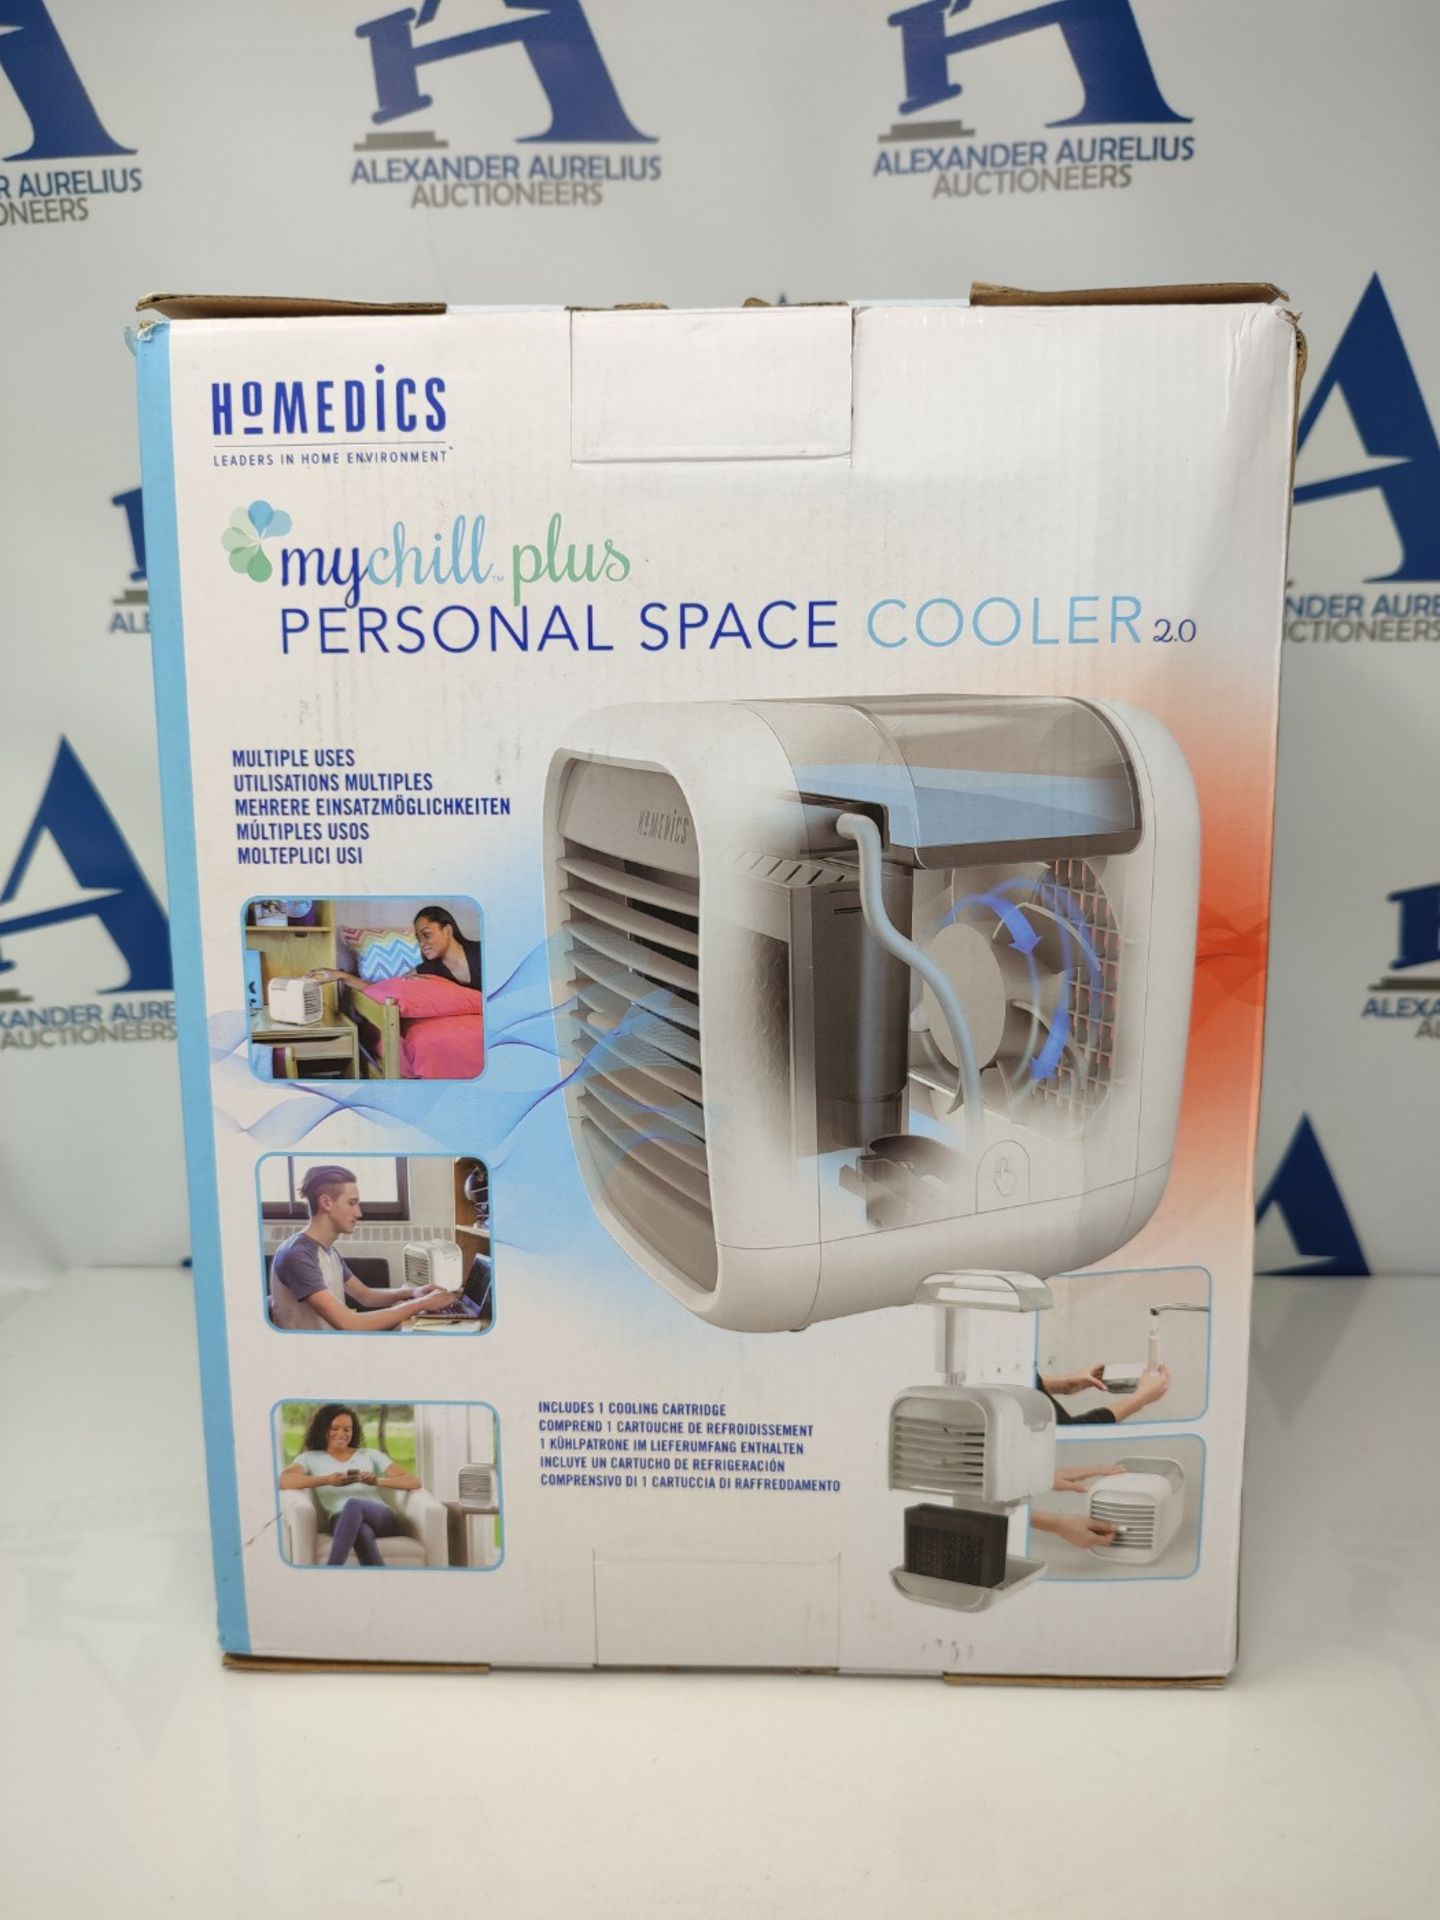 HoMedics PAC-35WT-EU2 Personal Space Cooler, MyChill Plus, 1.8 Metre Cooling Area, 3 S - Image 3 of 10